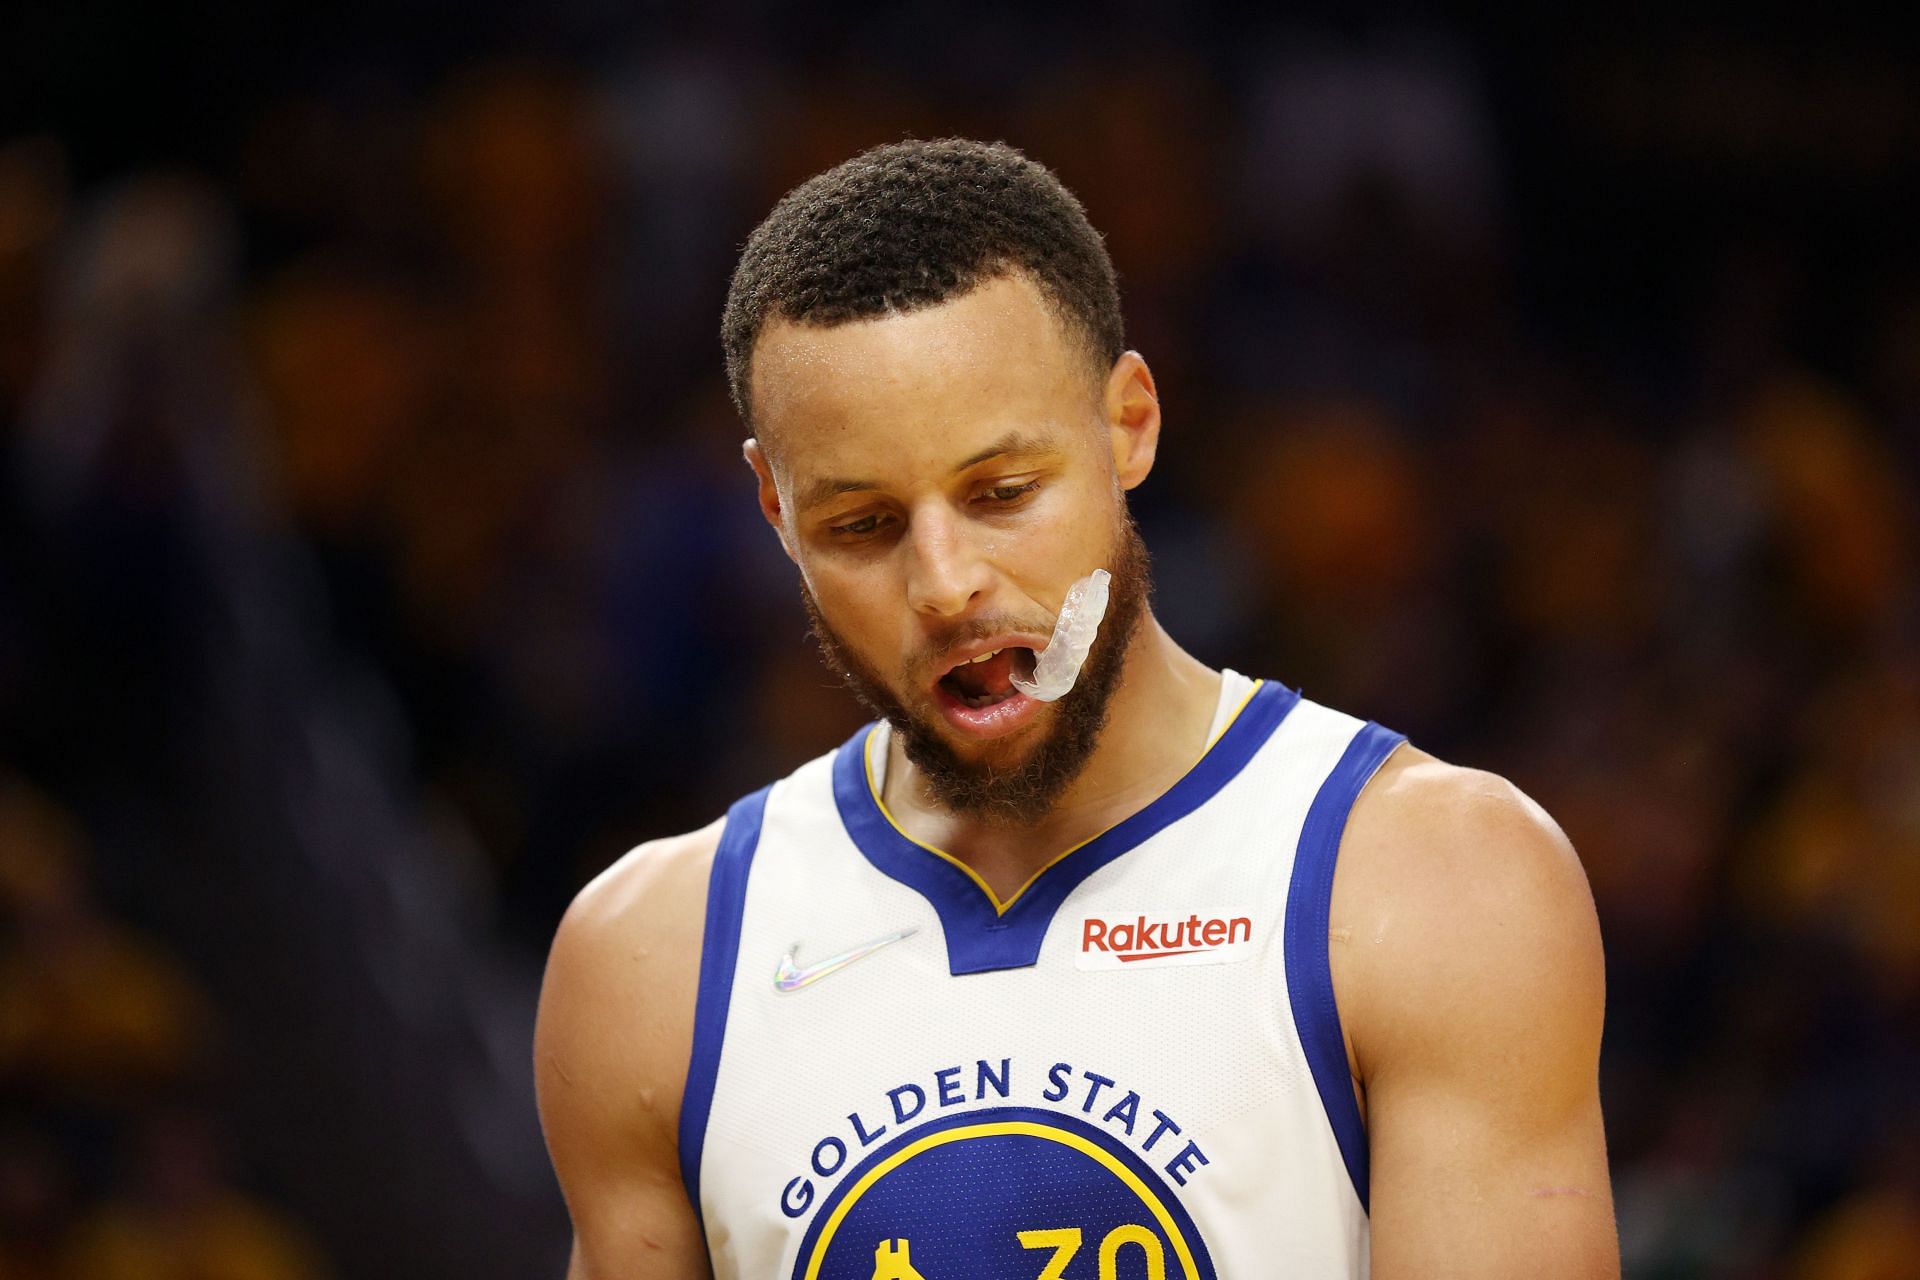 Thanks to his maturity, Curry is playing like the best player in the NBA finals.